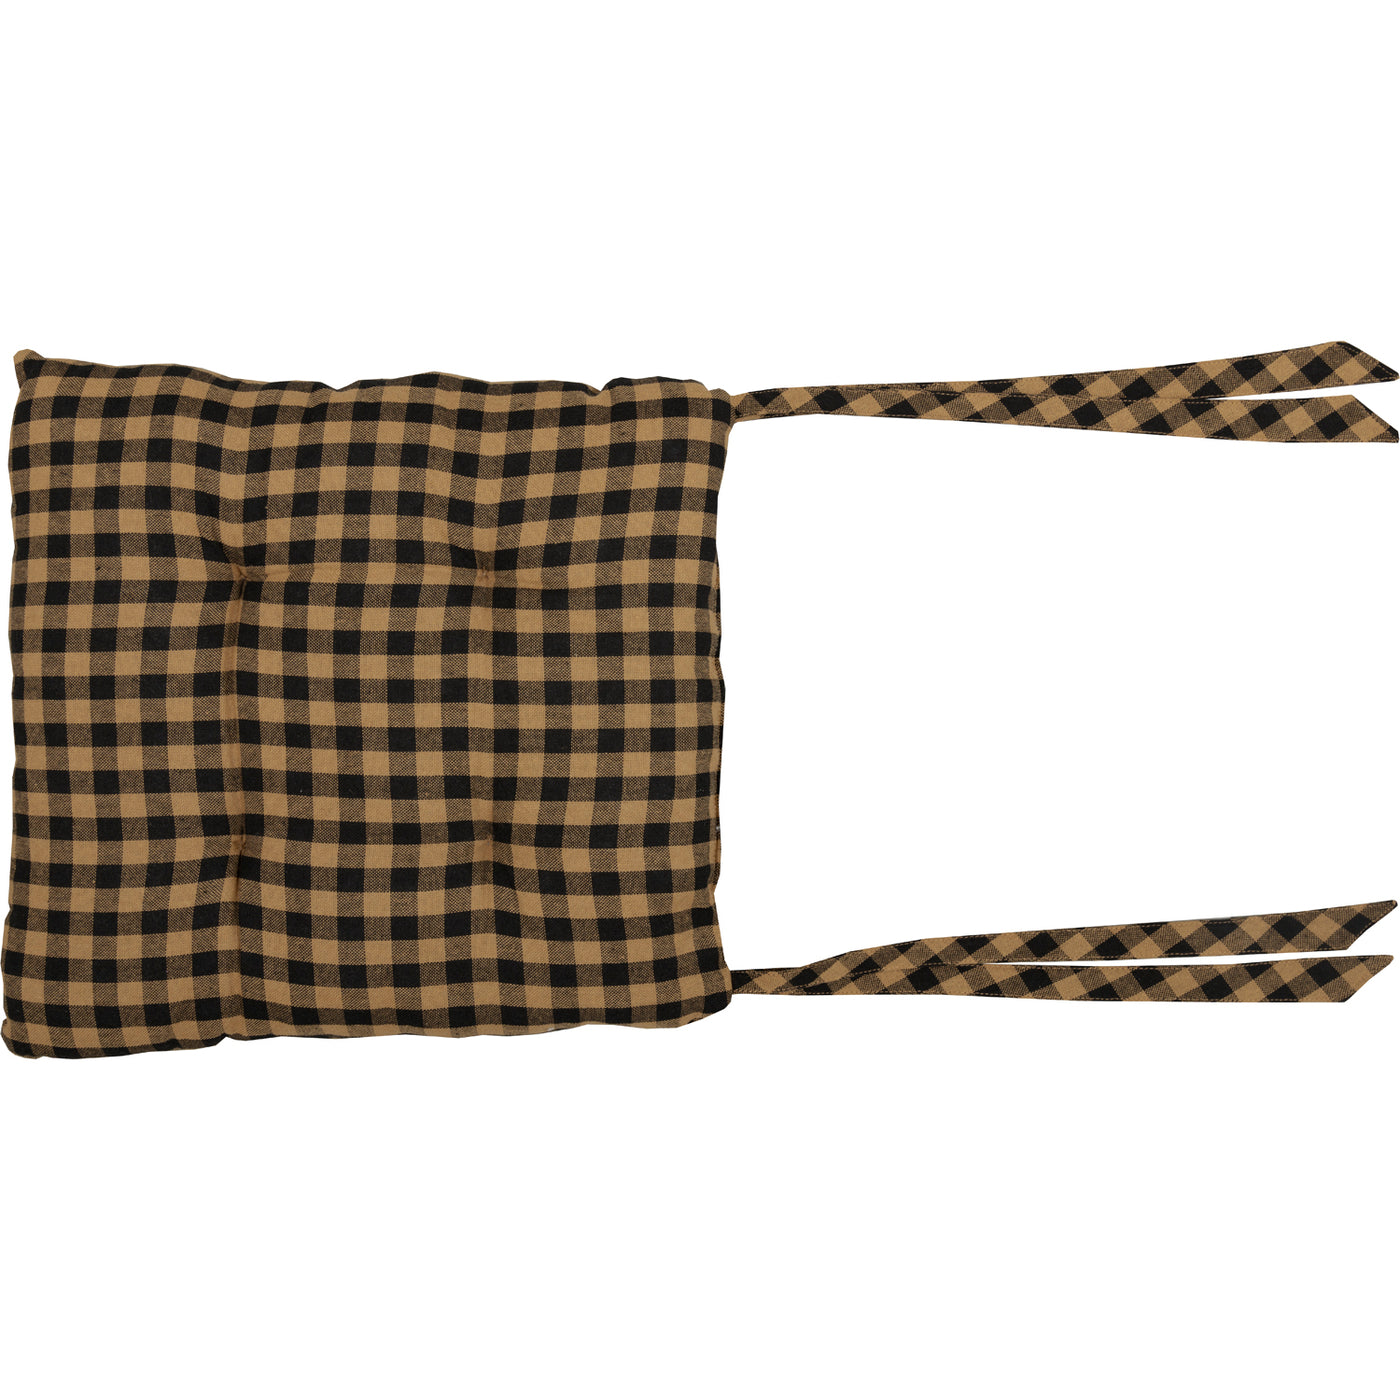 💙 Black And Tan Check Chair Pad With Tie Ons